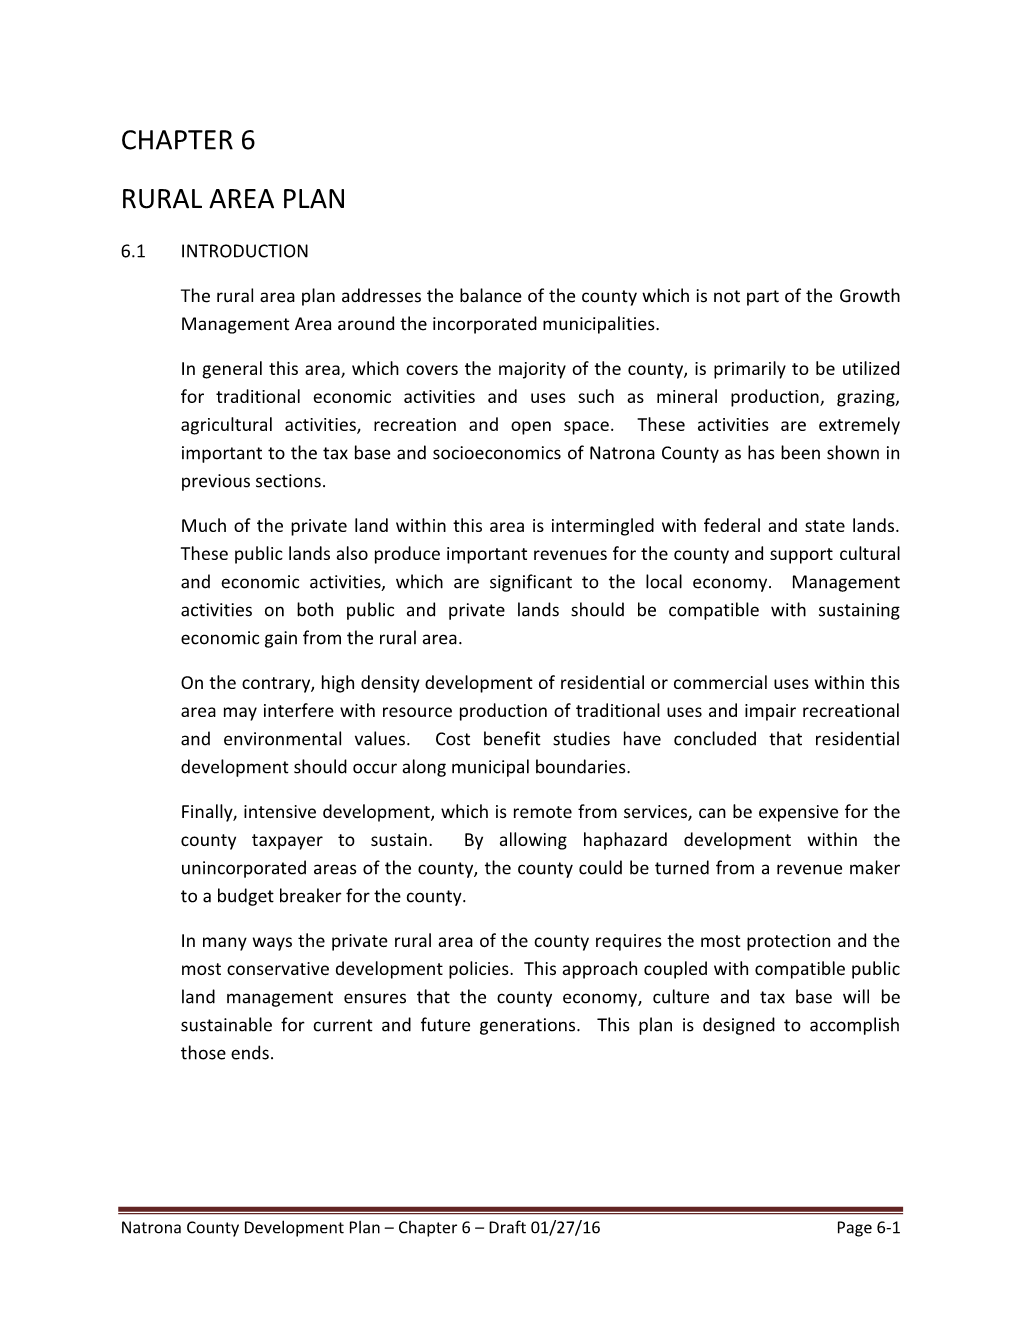 Chapter 6 Rural Area Plan